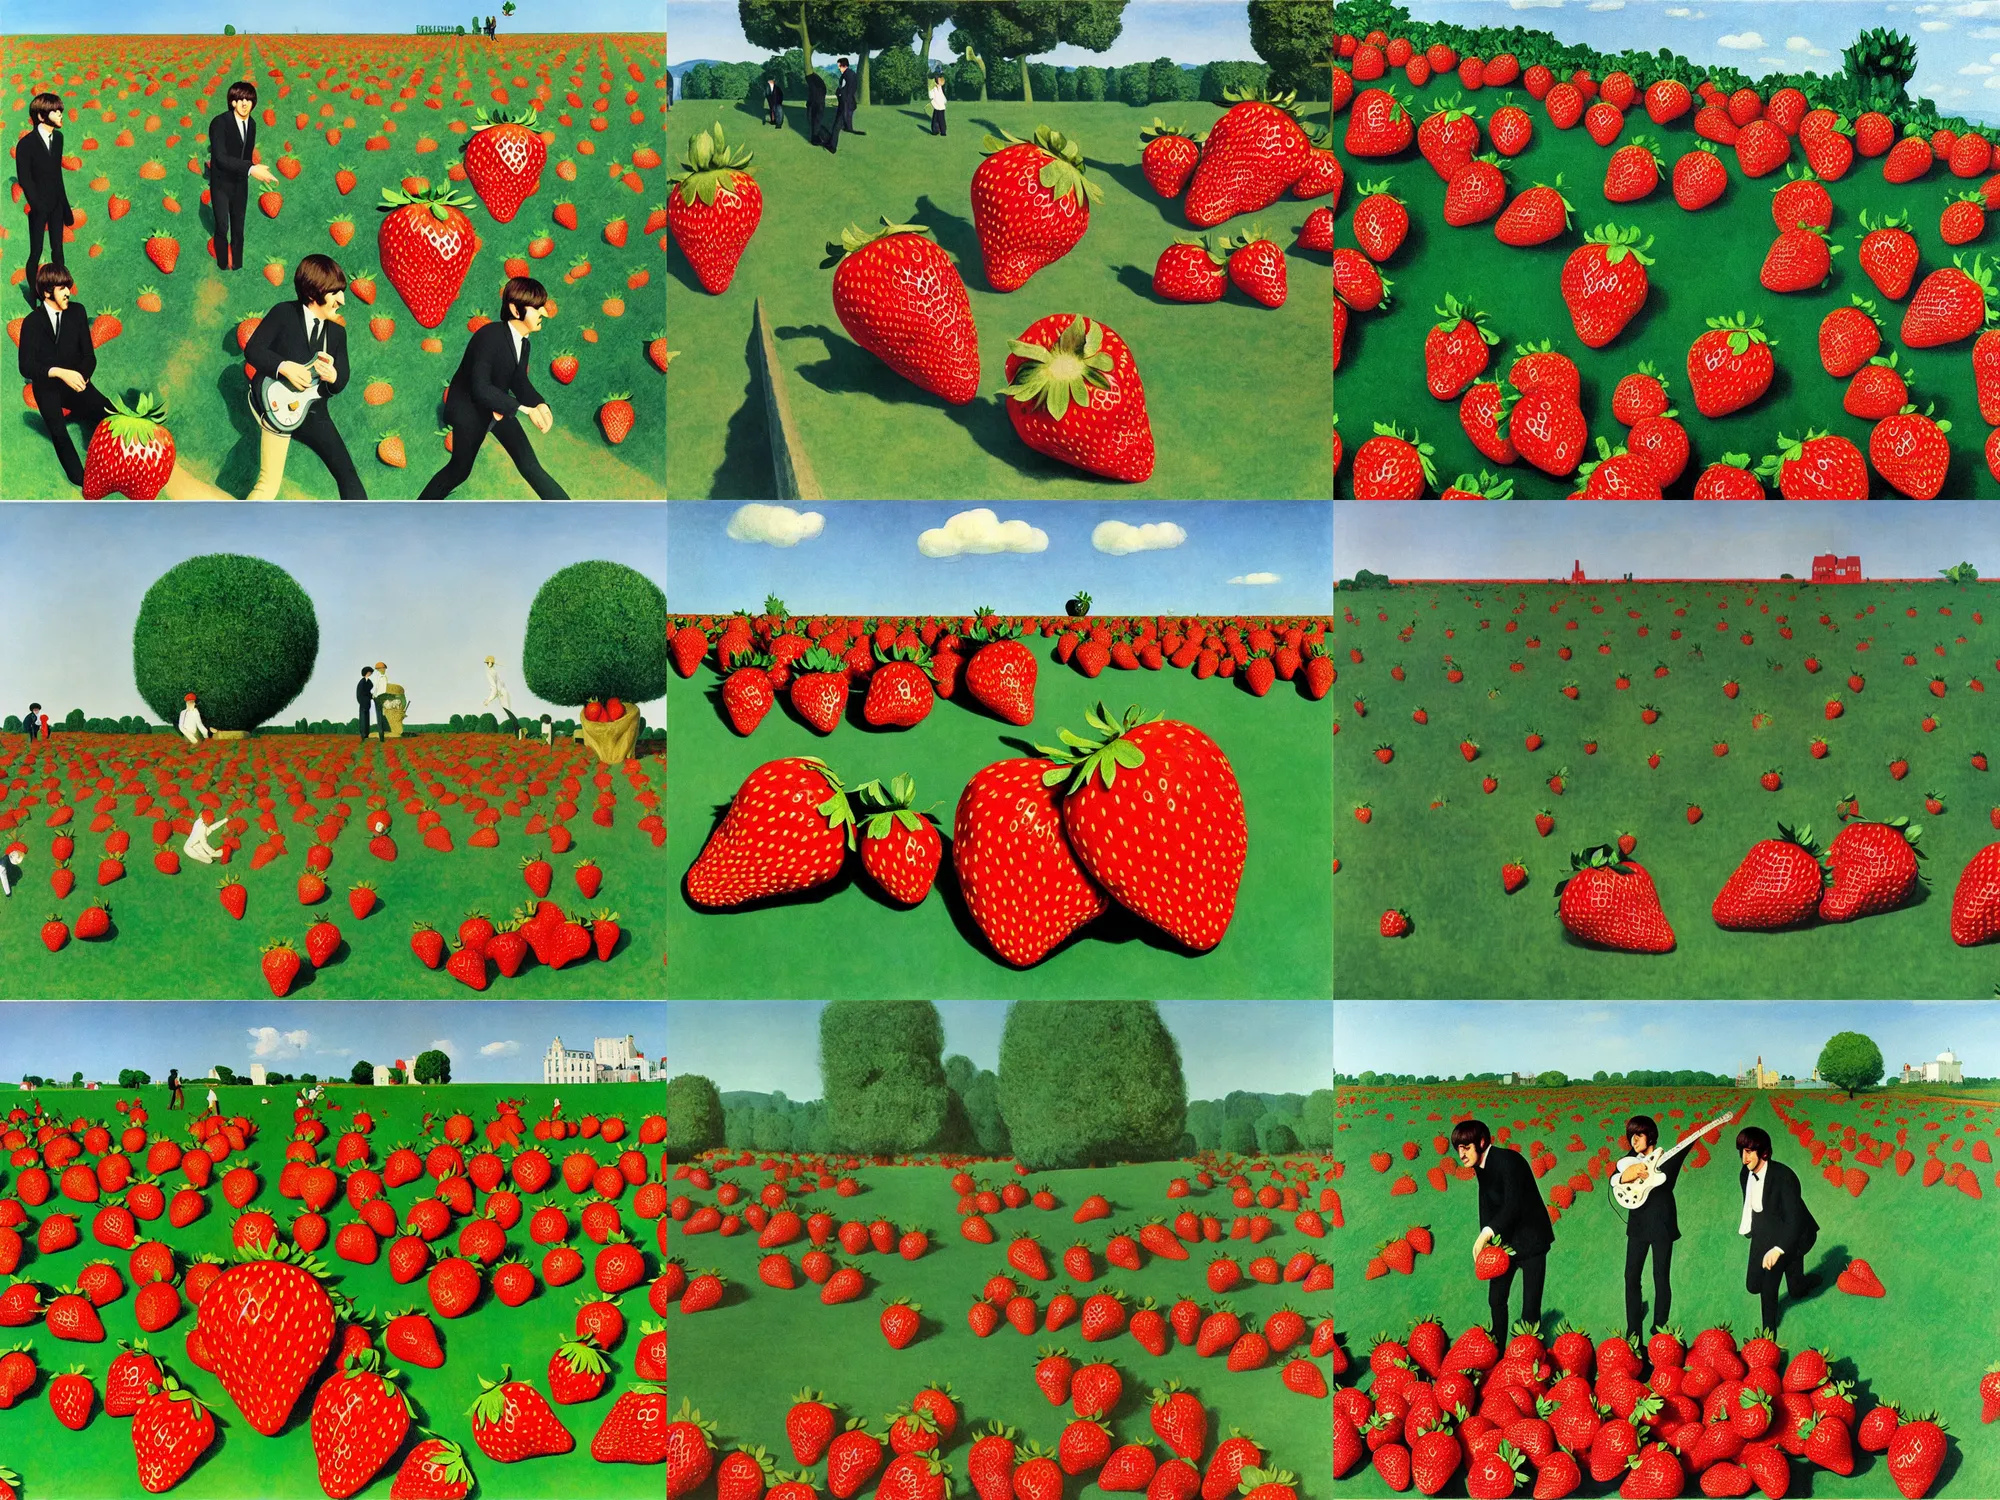 Prompt: the beatles are playing strawberry fields forever to a giant strawberry growing in the strawberry field, painting by rene margritte and edward hopper